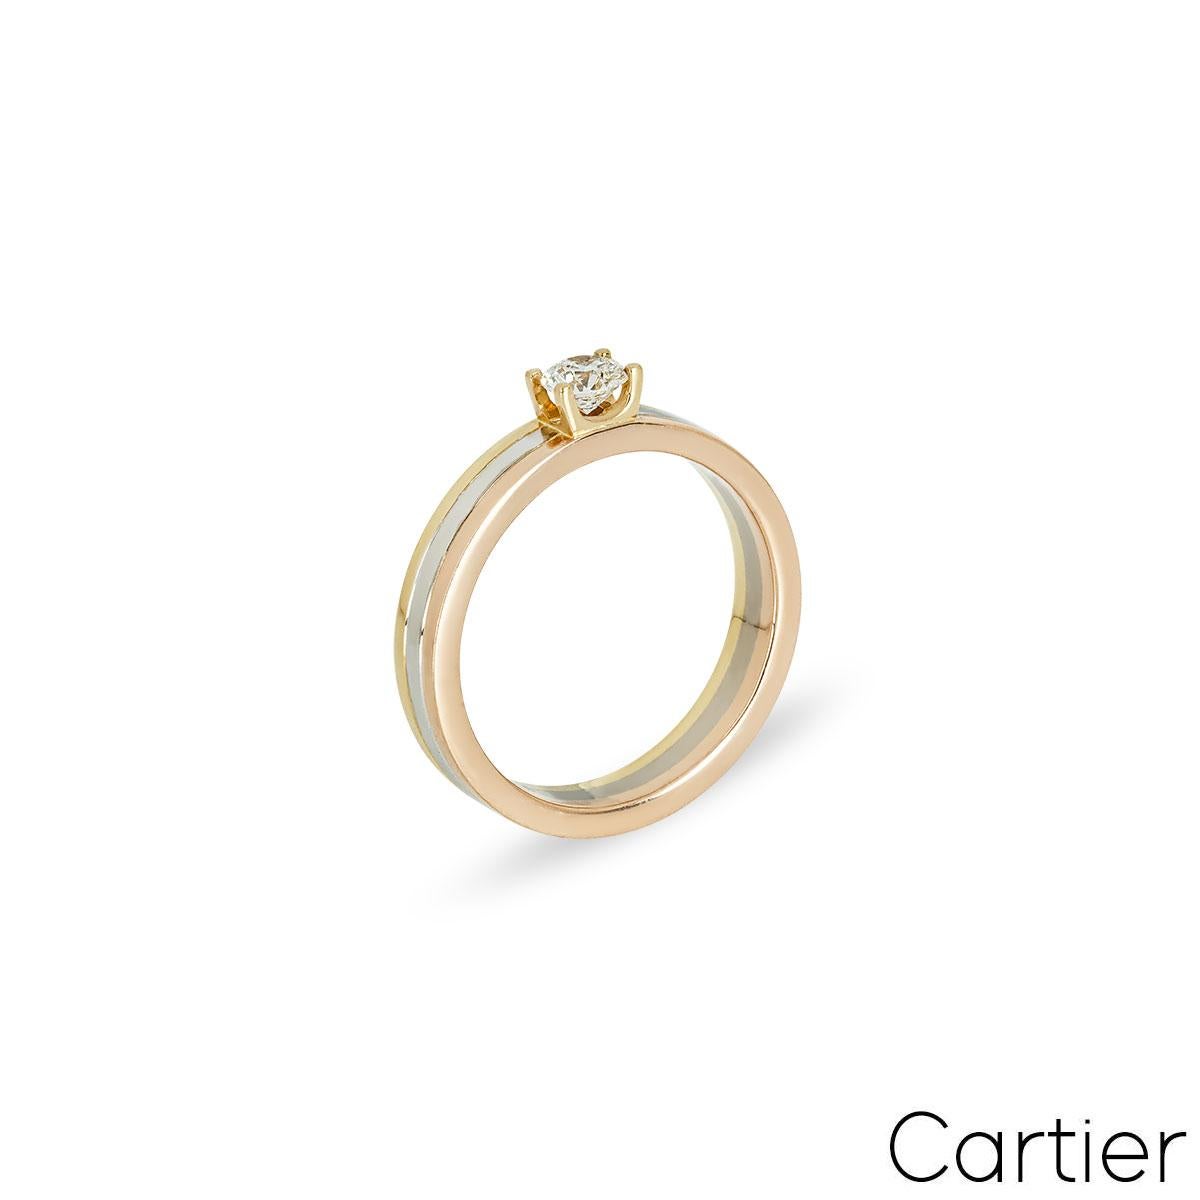 A gorgeous 18k tri-colour gold diamond ring by Cartier from the Trinity de Cartier collection. The ring is set to the centre with a 0.24ct round brilliant cut diamond. The diamond is set within a classic 4 prong setting with the band itself